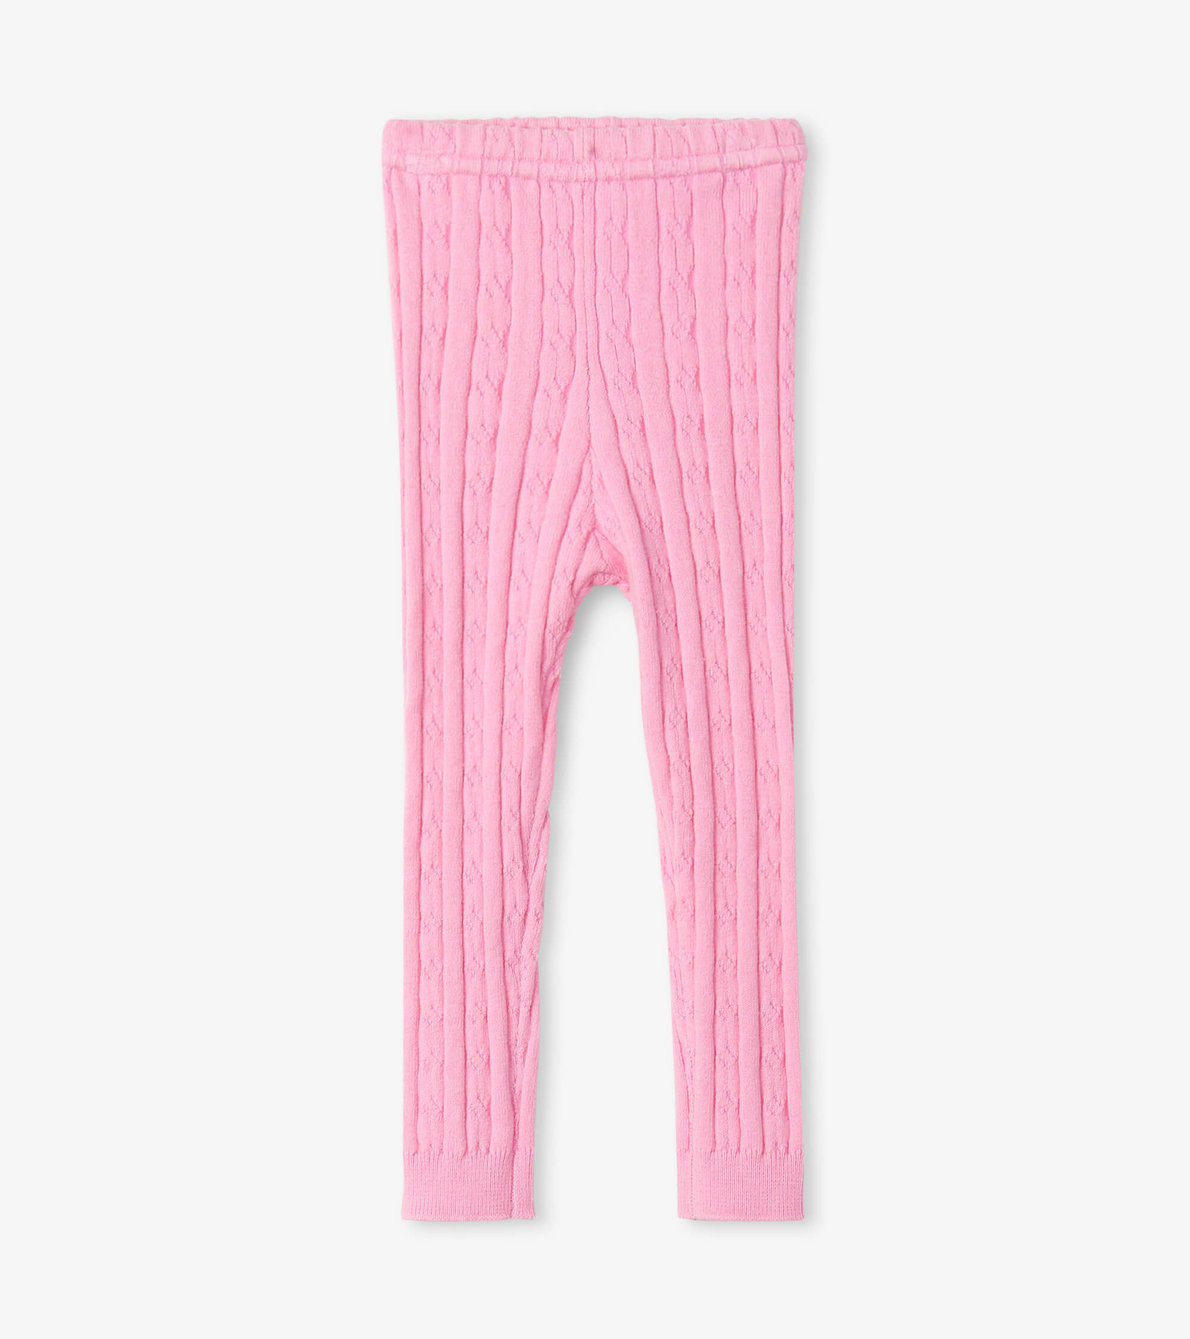 View larger image of Baby Pink Cable Knit Leggings